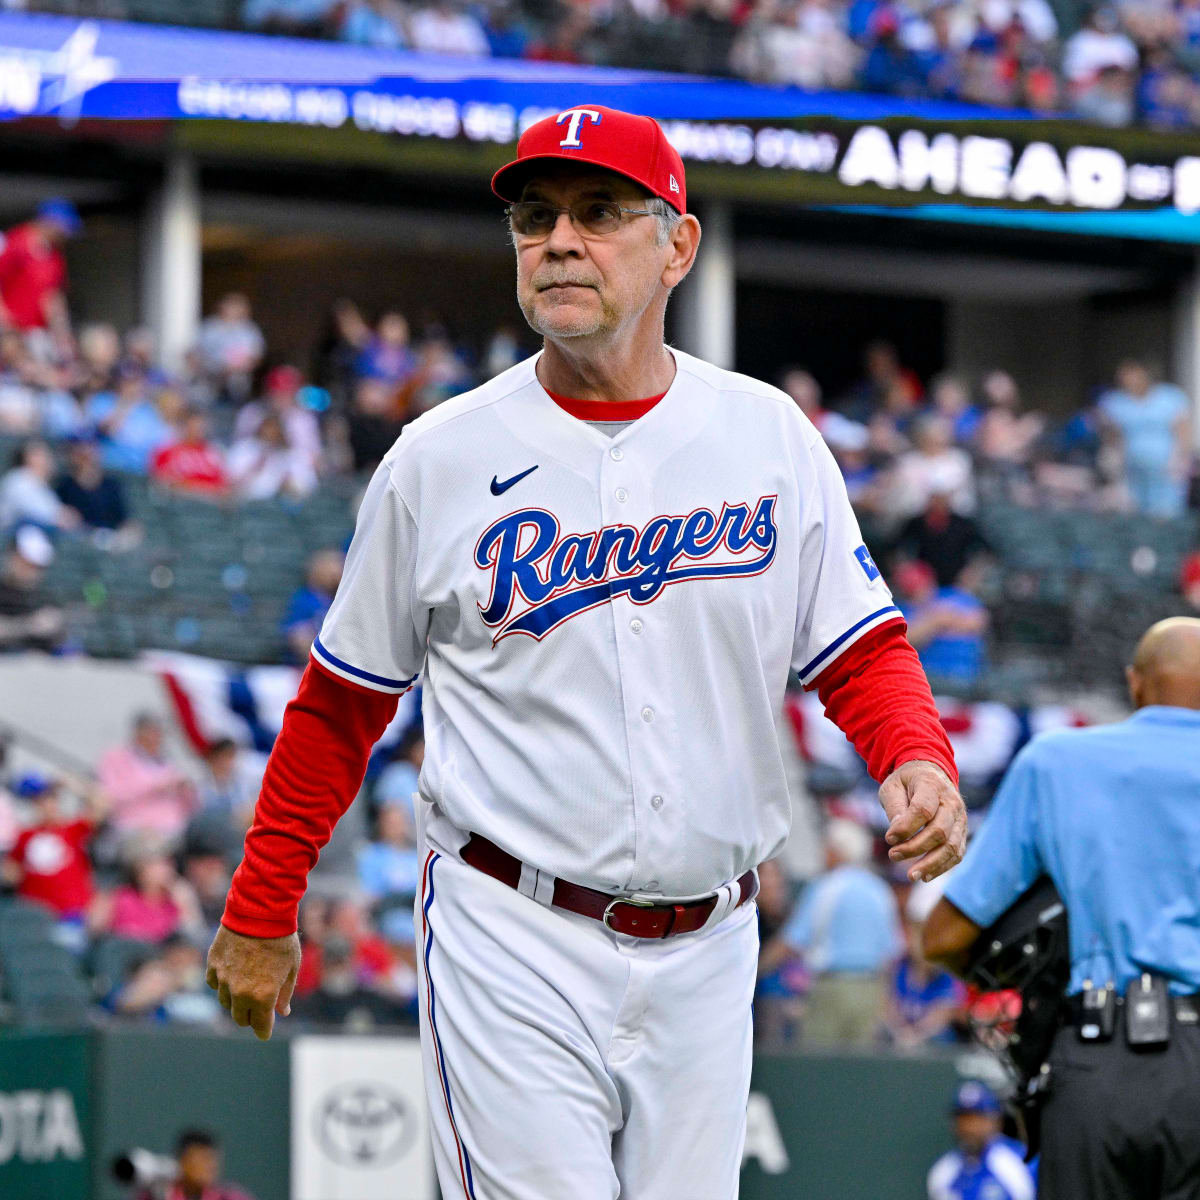 Texas Rangers Manager Bruce Bochy Passes Walter Alston on MLB Wins